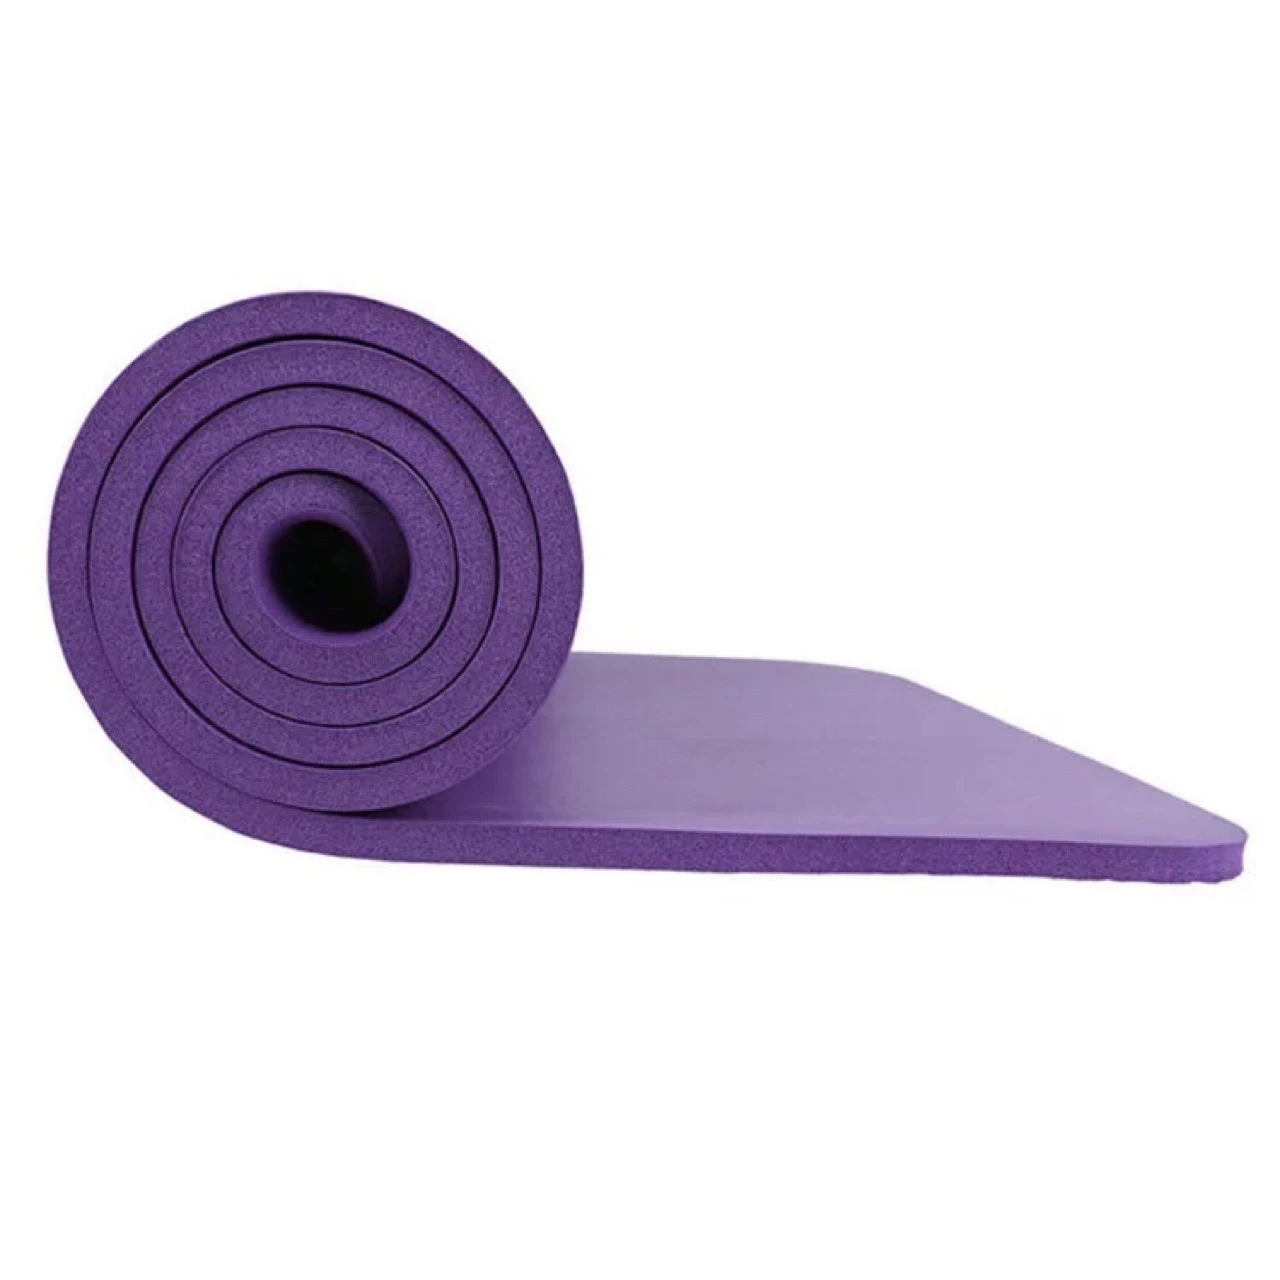 Exercise mat, material PVC filled with sponge